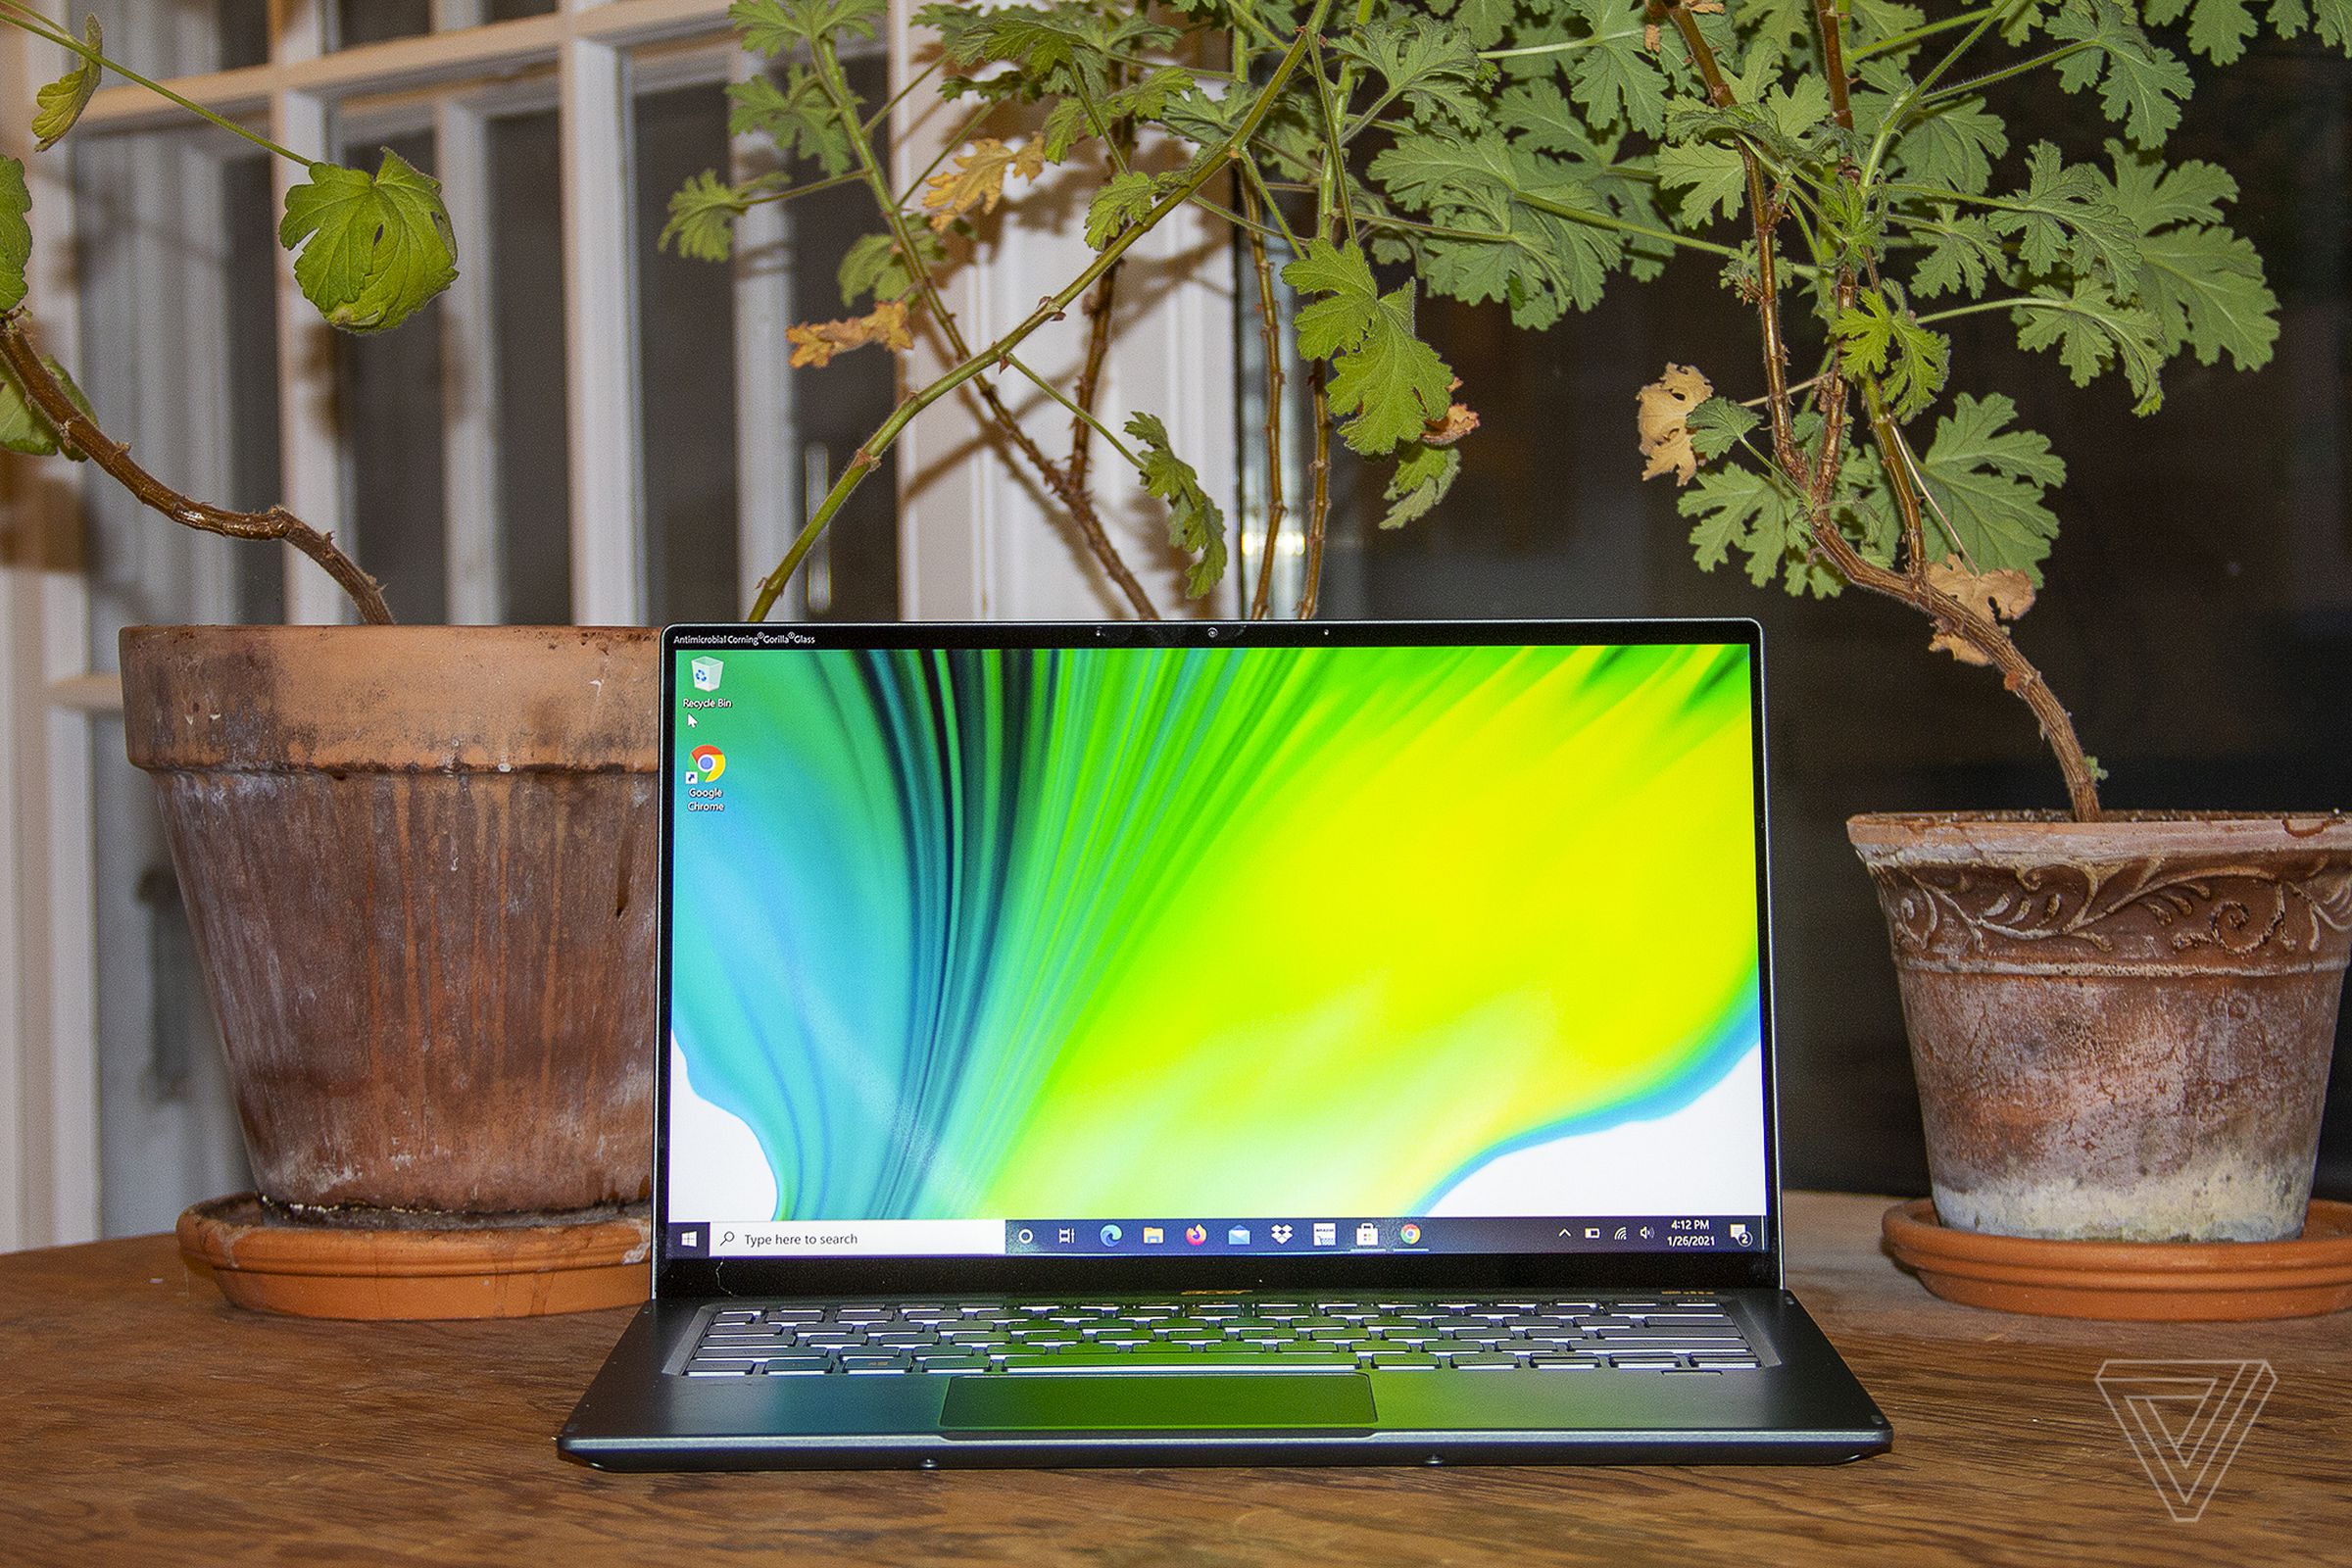 The Acer Swift 5 open, seen from the front. The screen depicts a green, blue, and white background.